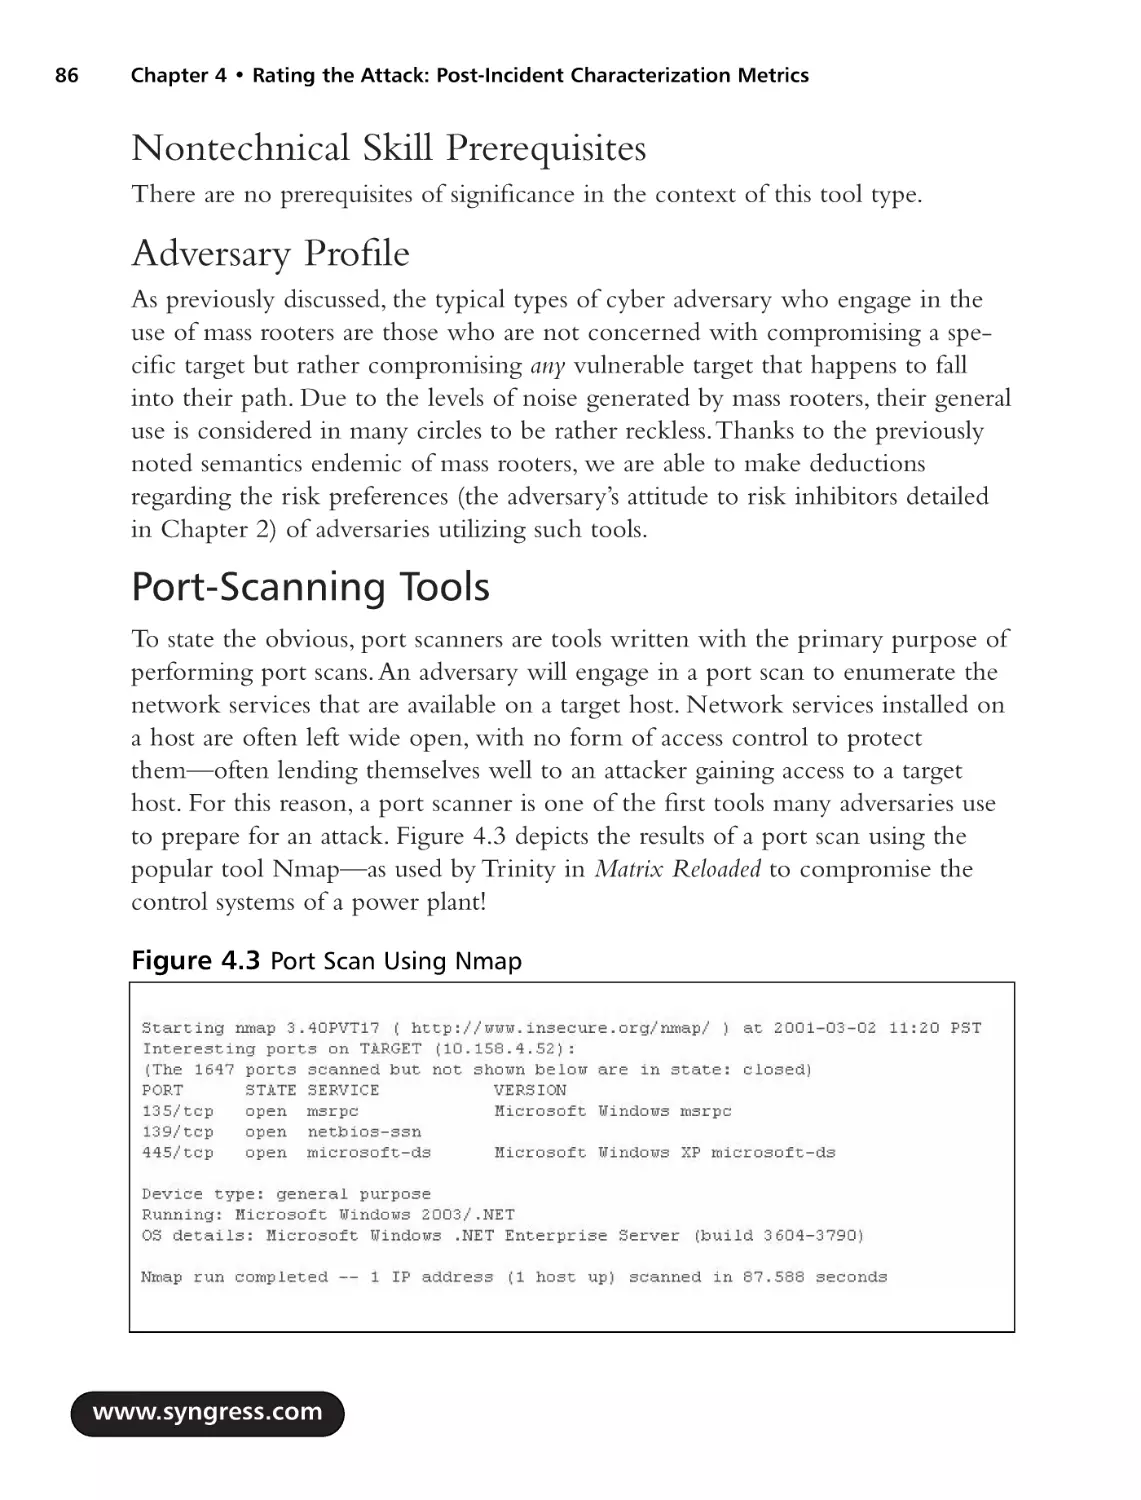 Nontechnical Skill Prerequisites
Adversary Profile
Port-Scanning Tools